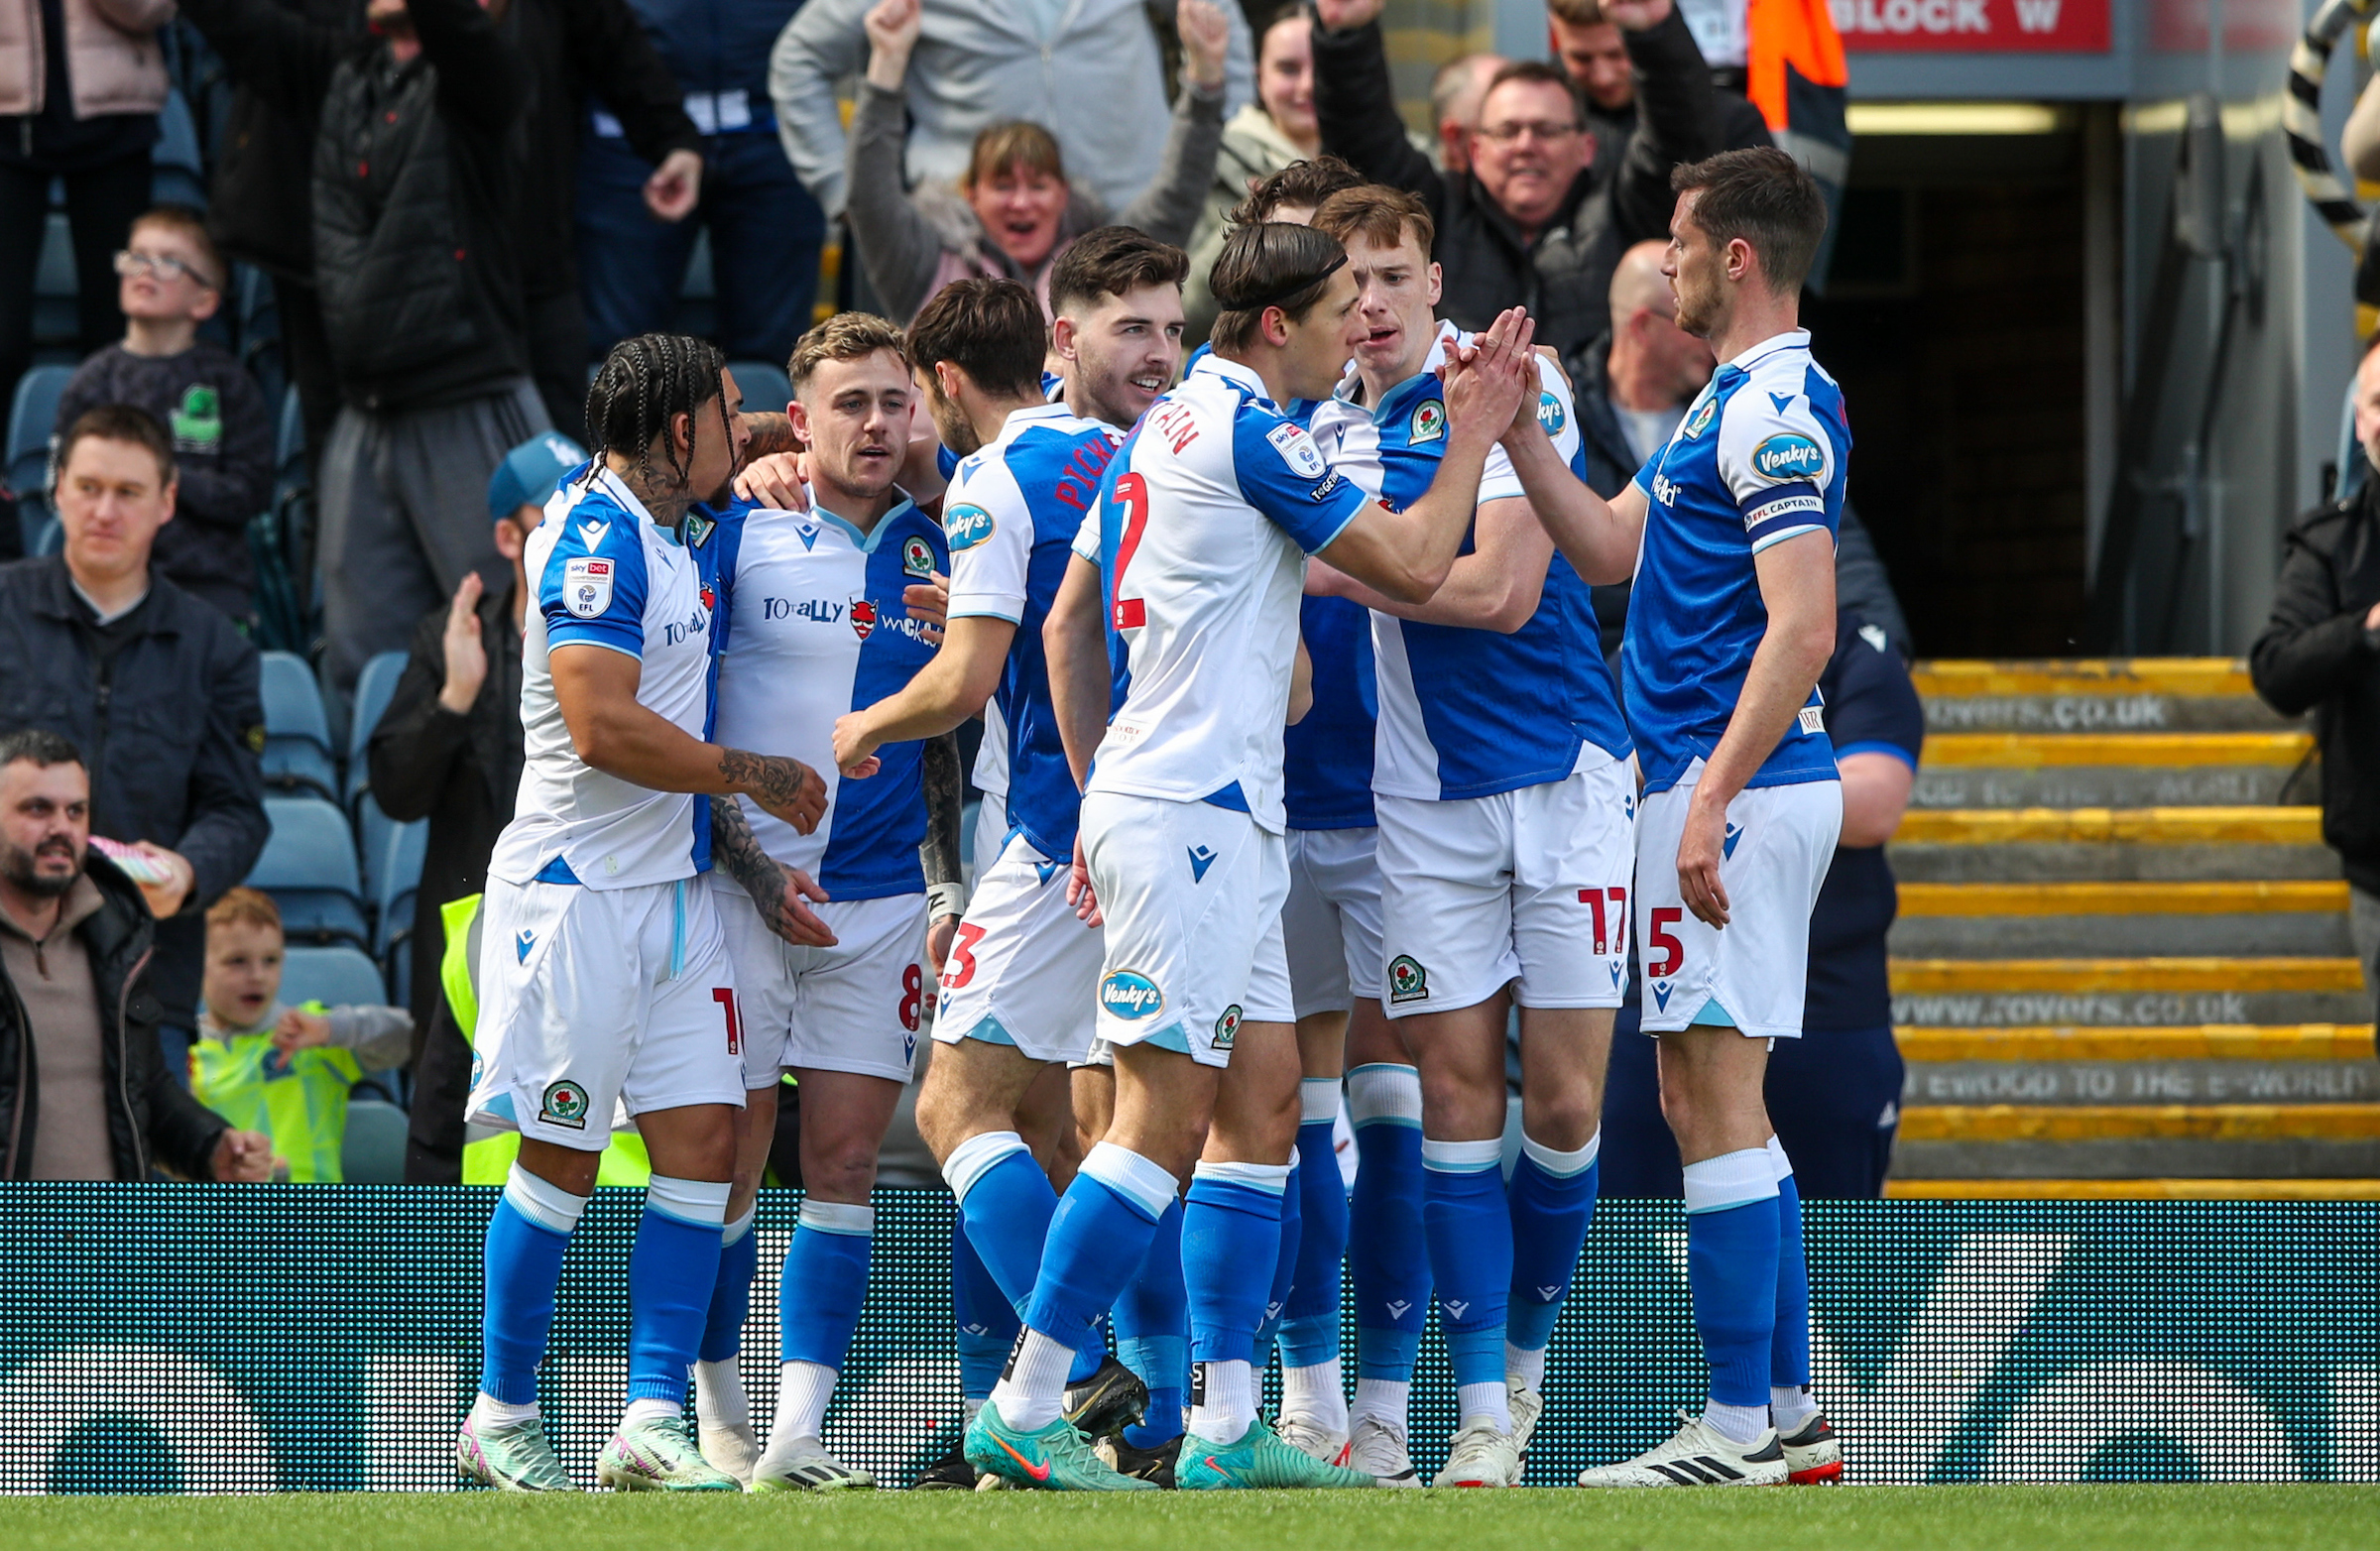 Transfers, contracts and your Blackburn questions answered